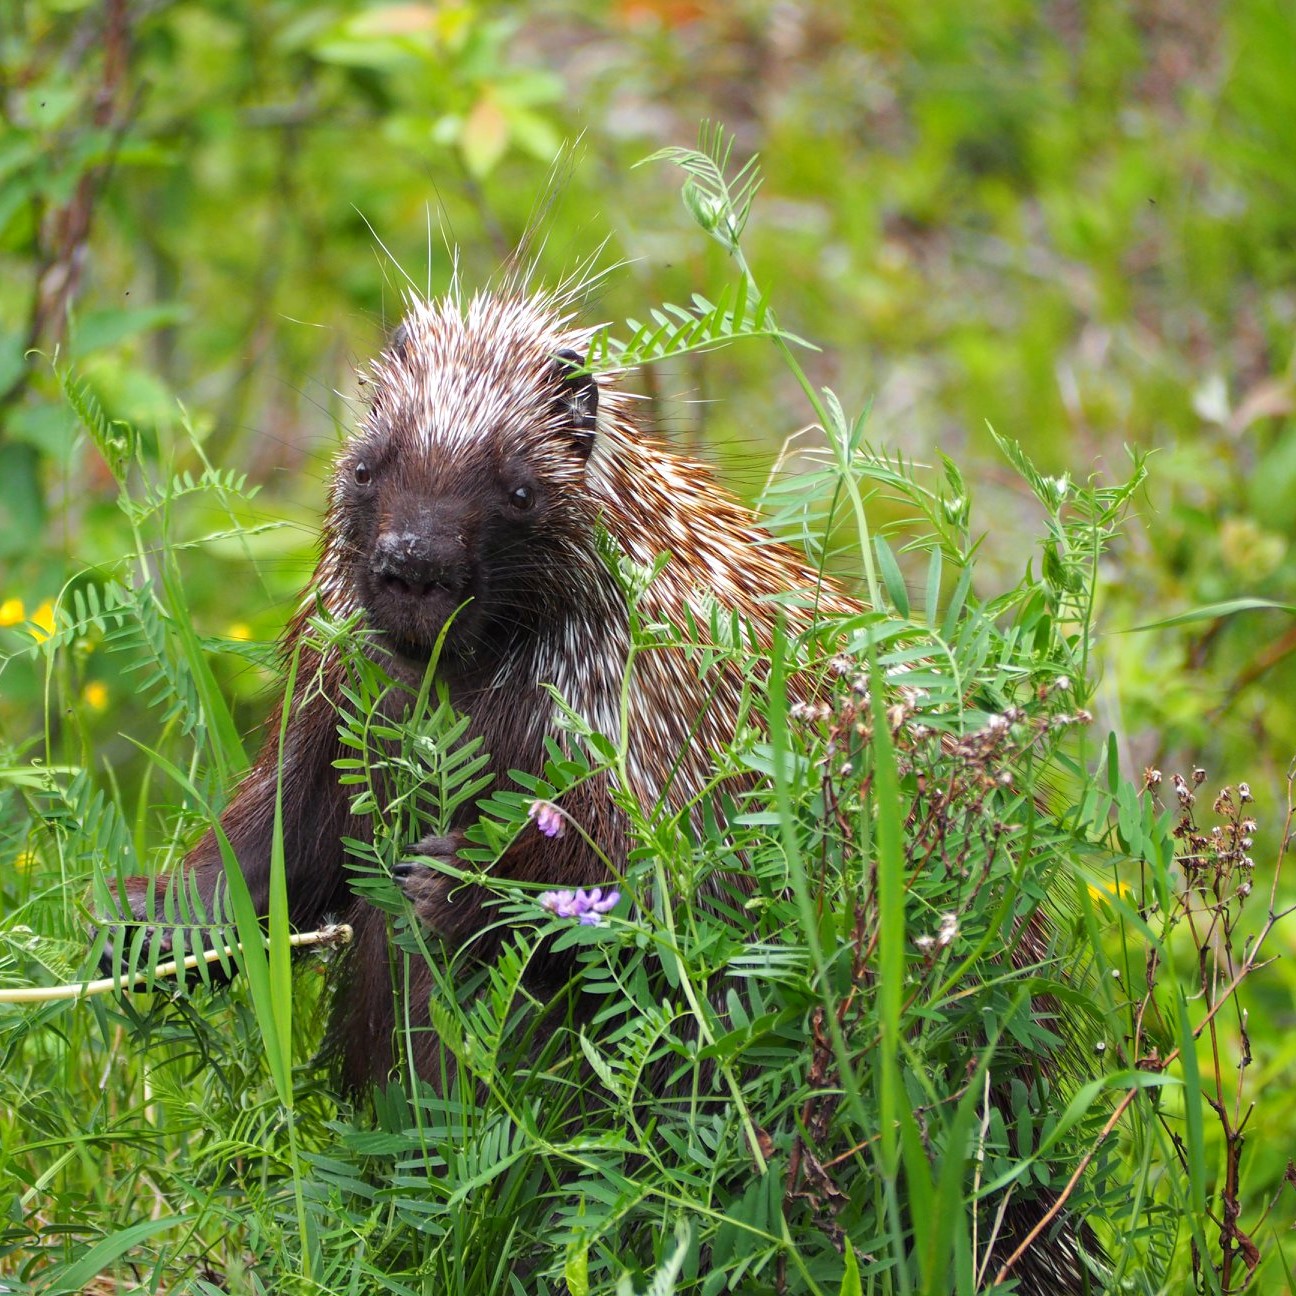 A porcupine stands up in high grass.